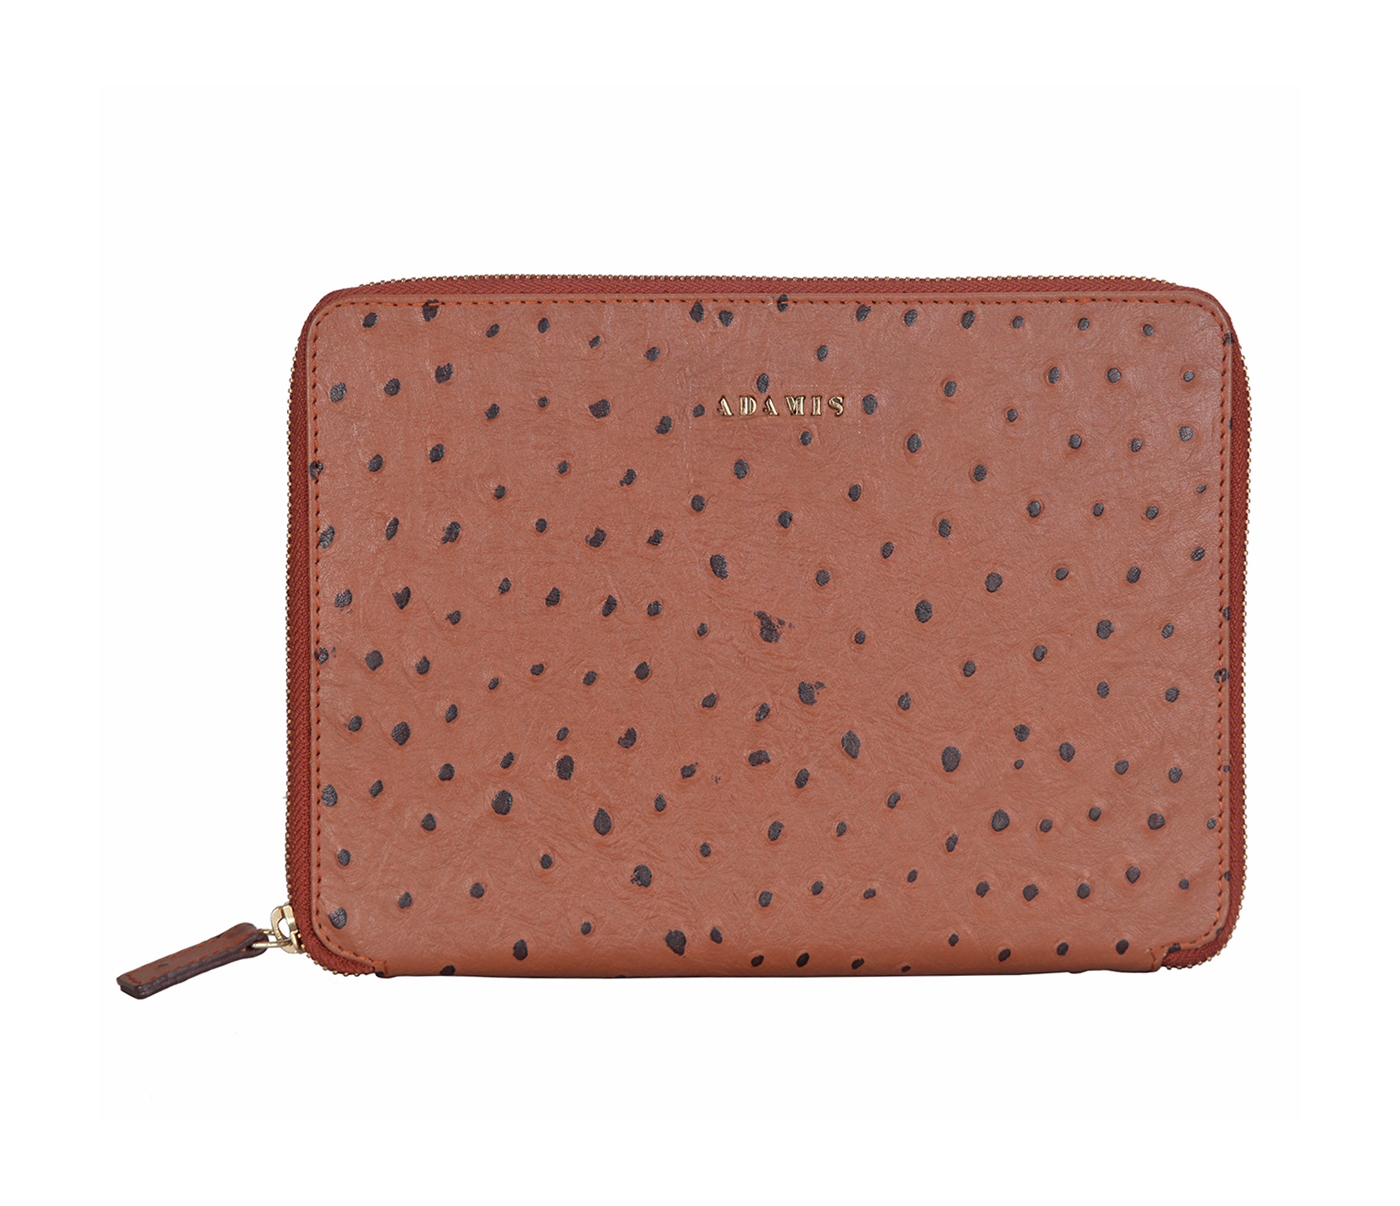 W281--Ipad mini cover with magnetic tray in Genuine Leather - Tan